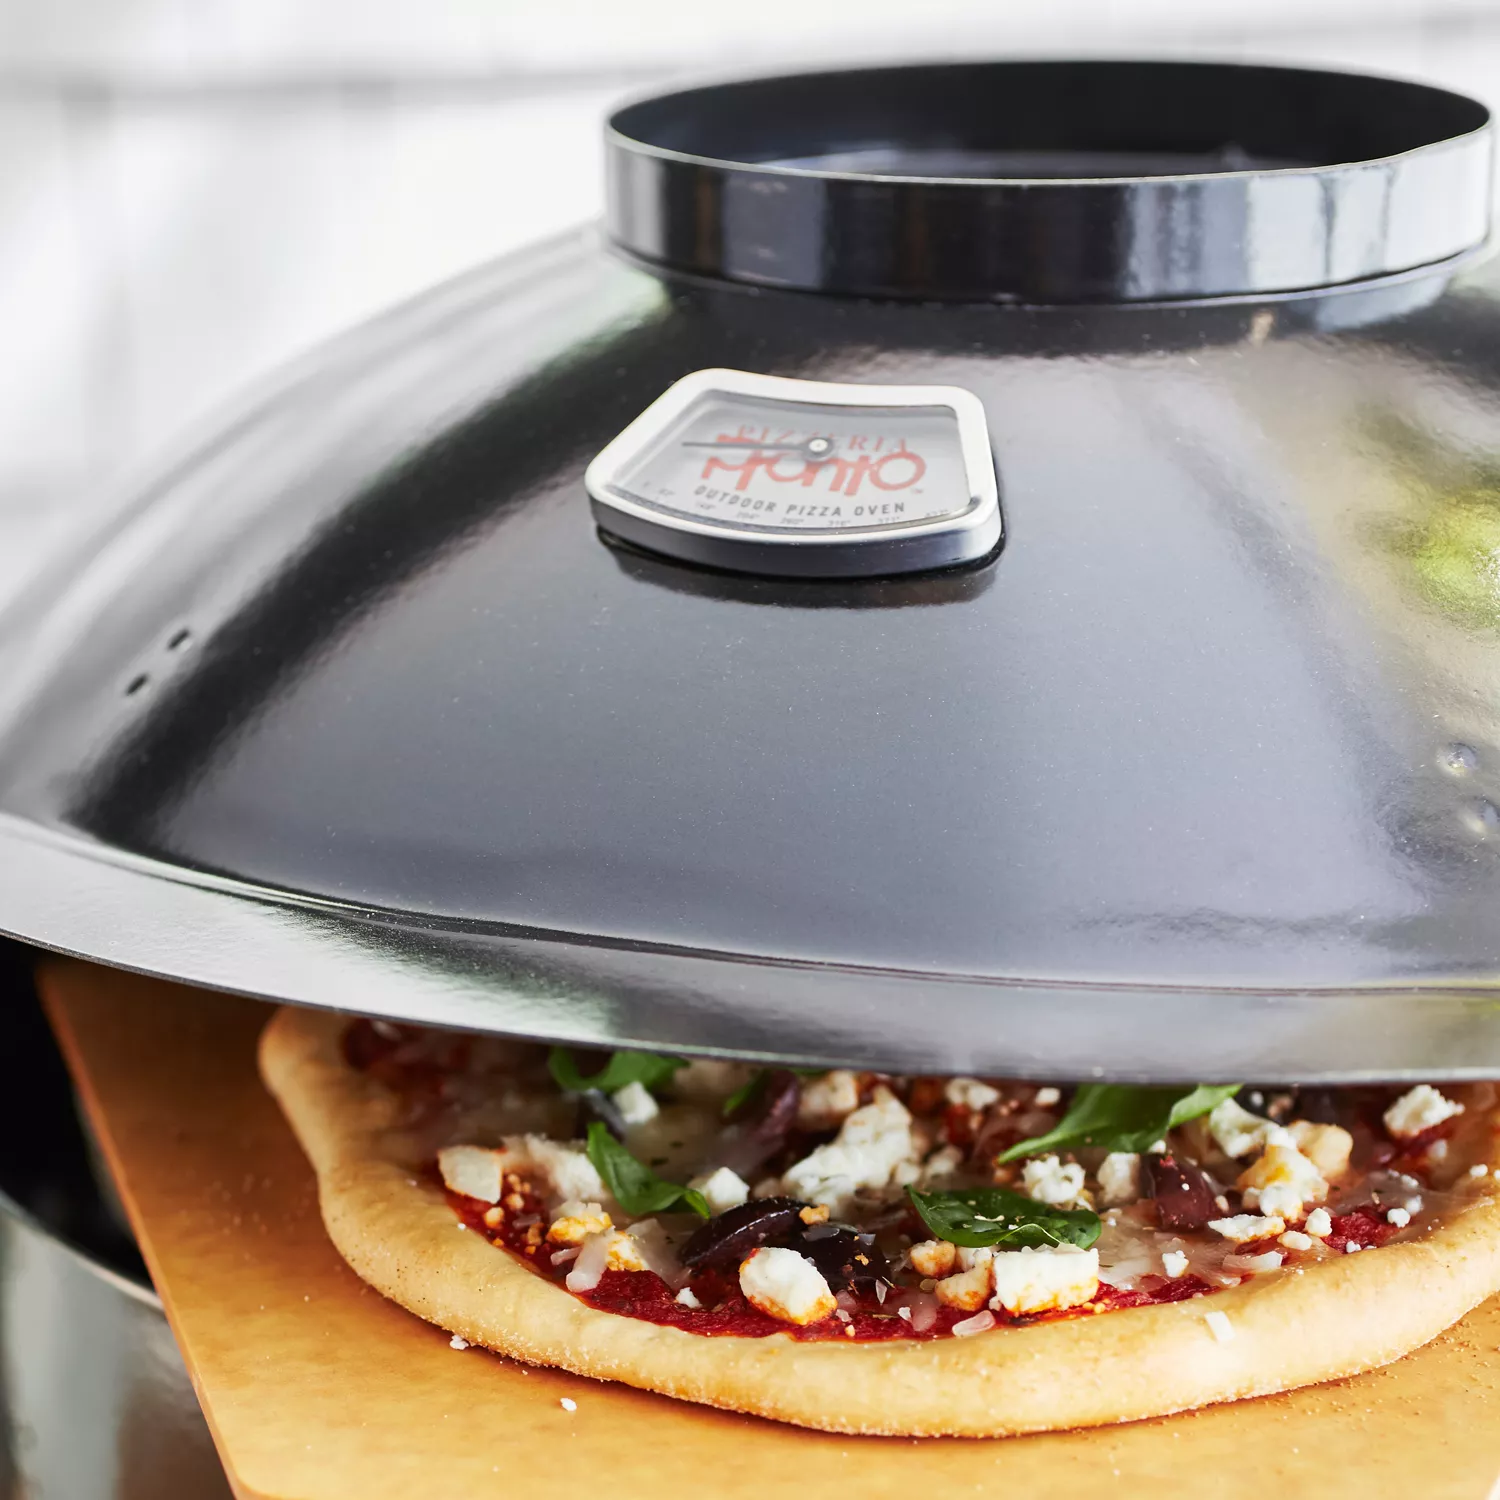 Pizzeria Pronto: A Mini Pizza Oven for Your Gas Cooktop